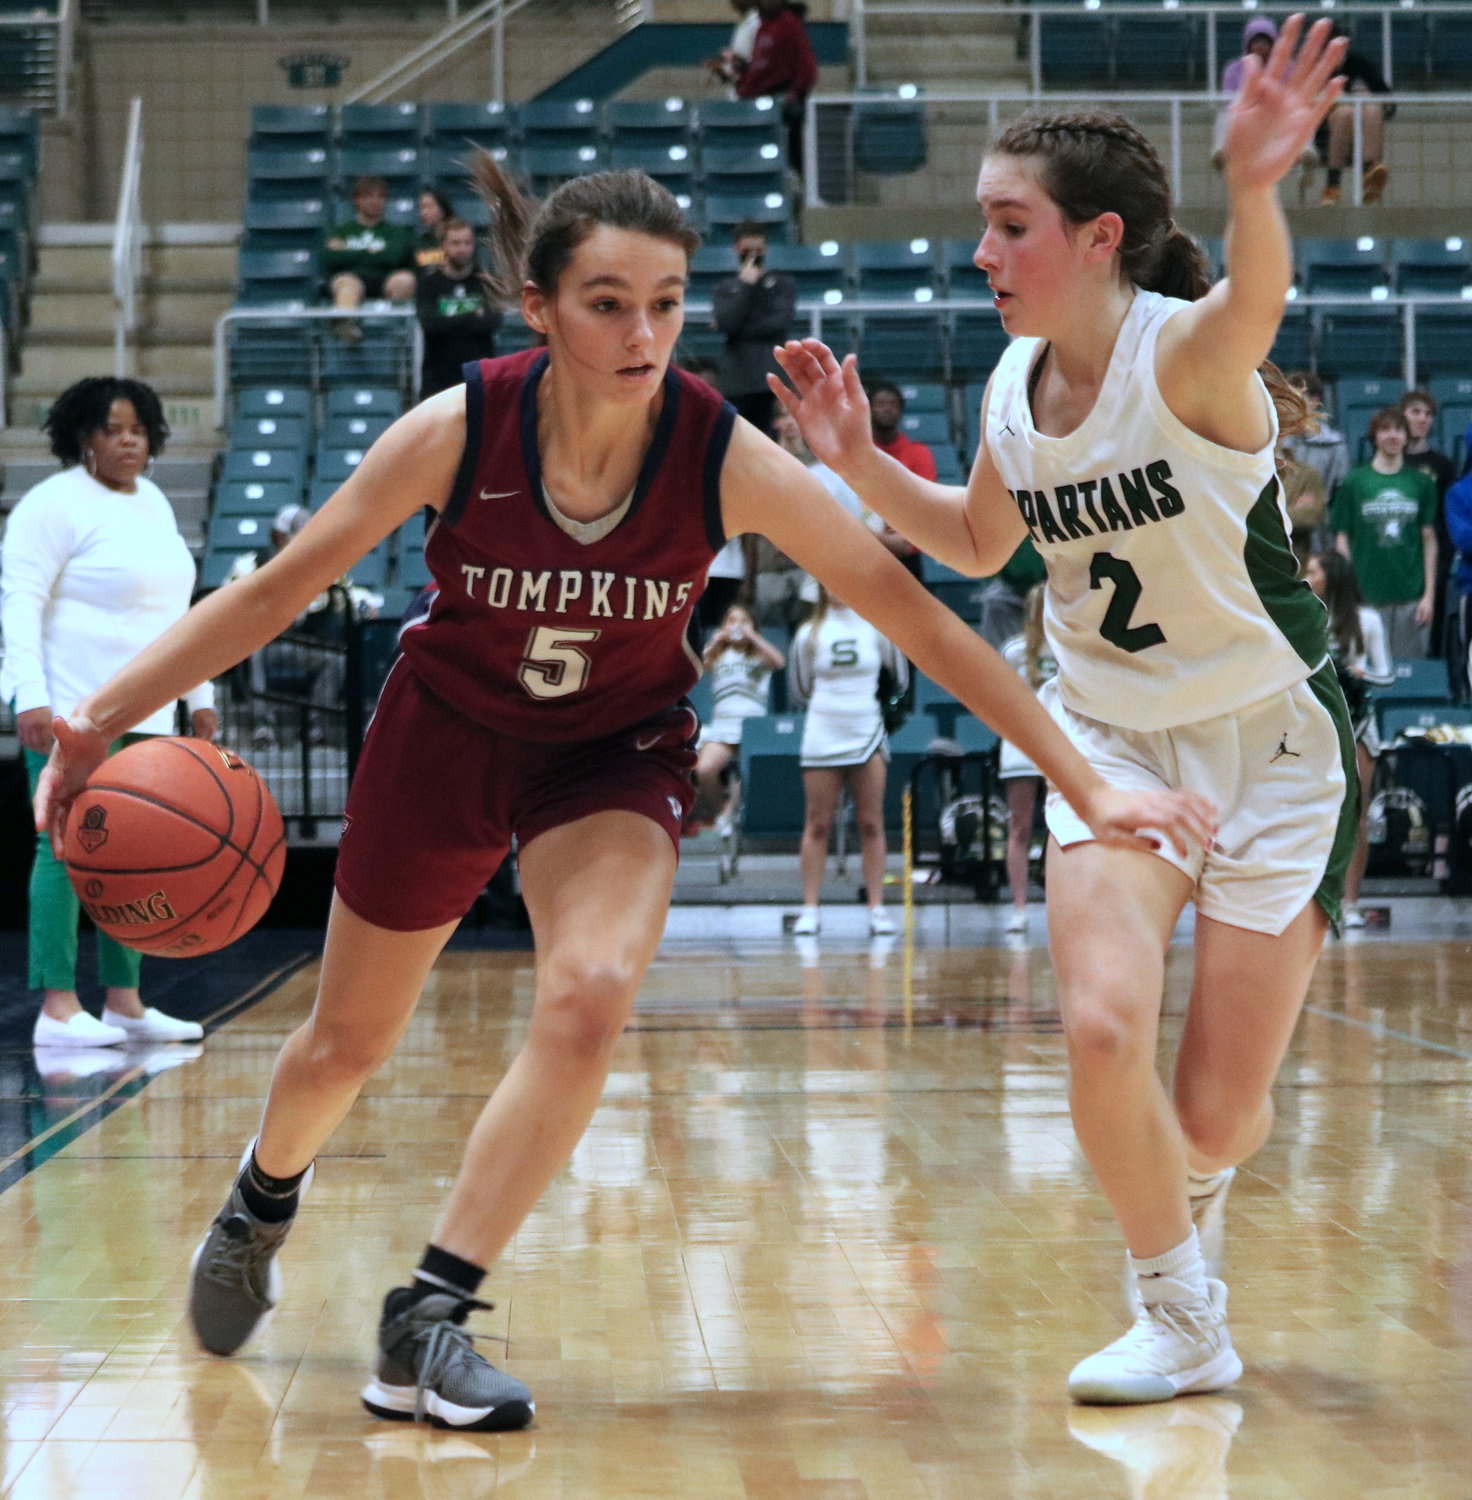 Kayla Boven dribbles past a defender during Friday’s game between Tompkins and Stratford at the Merrell Center.